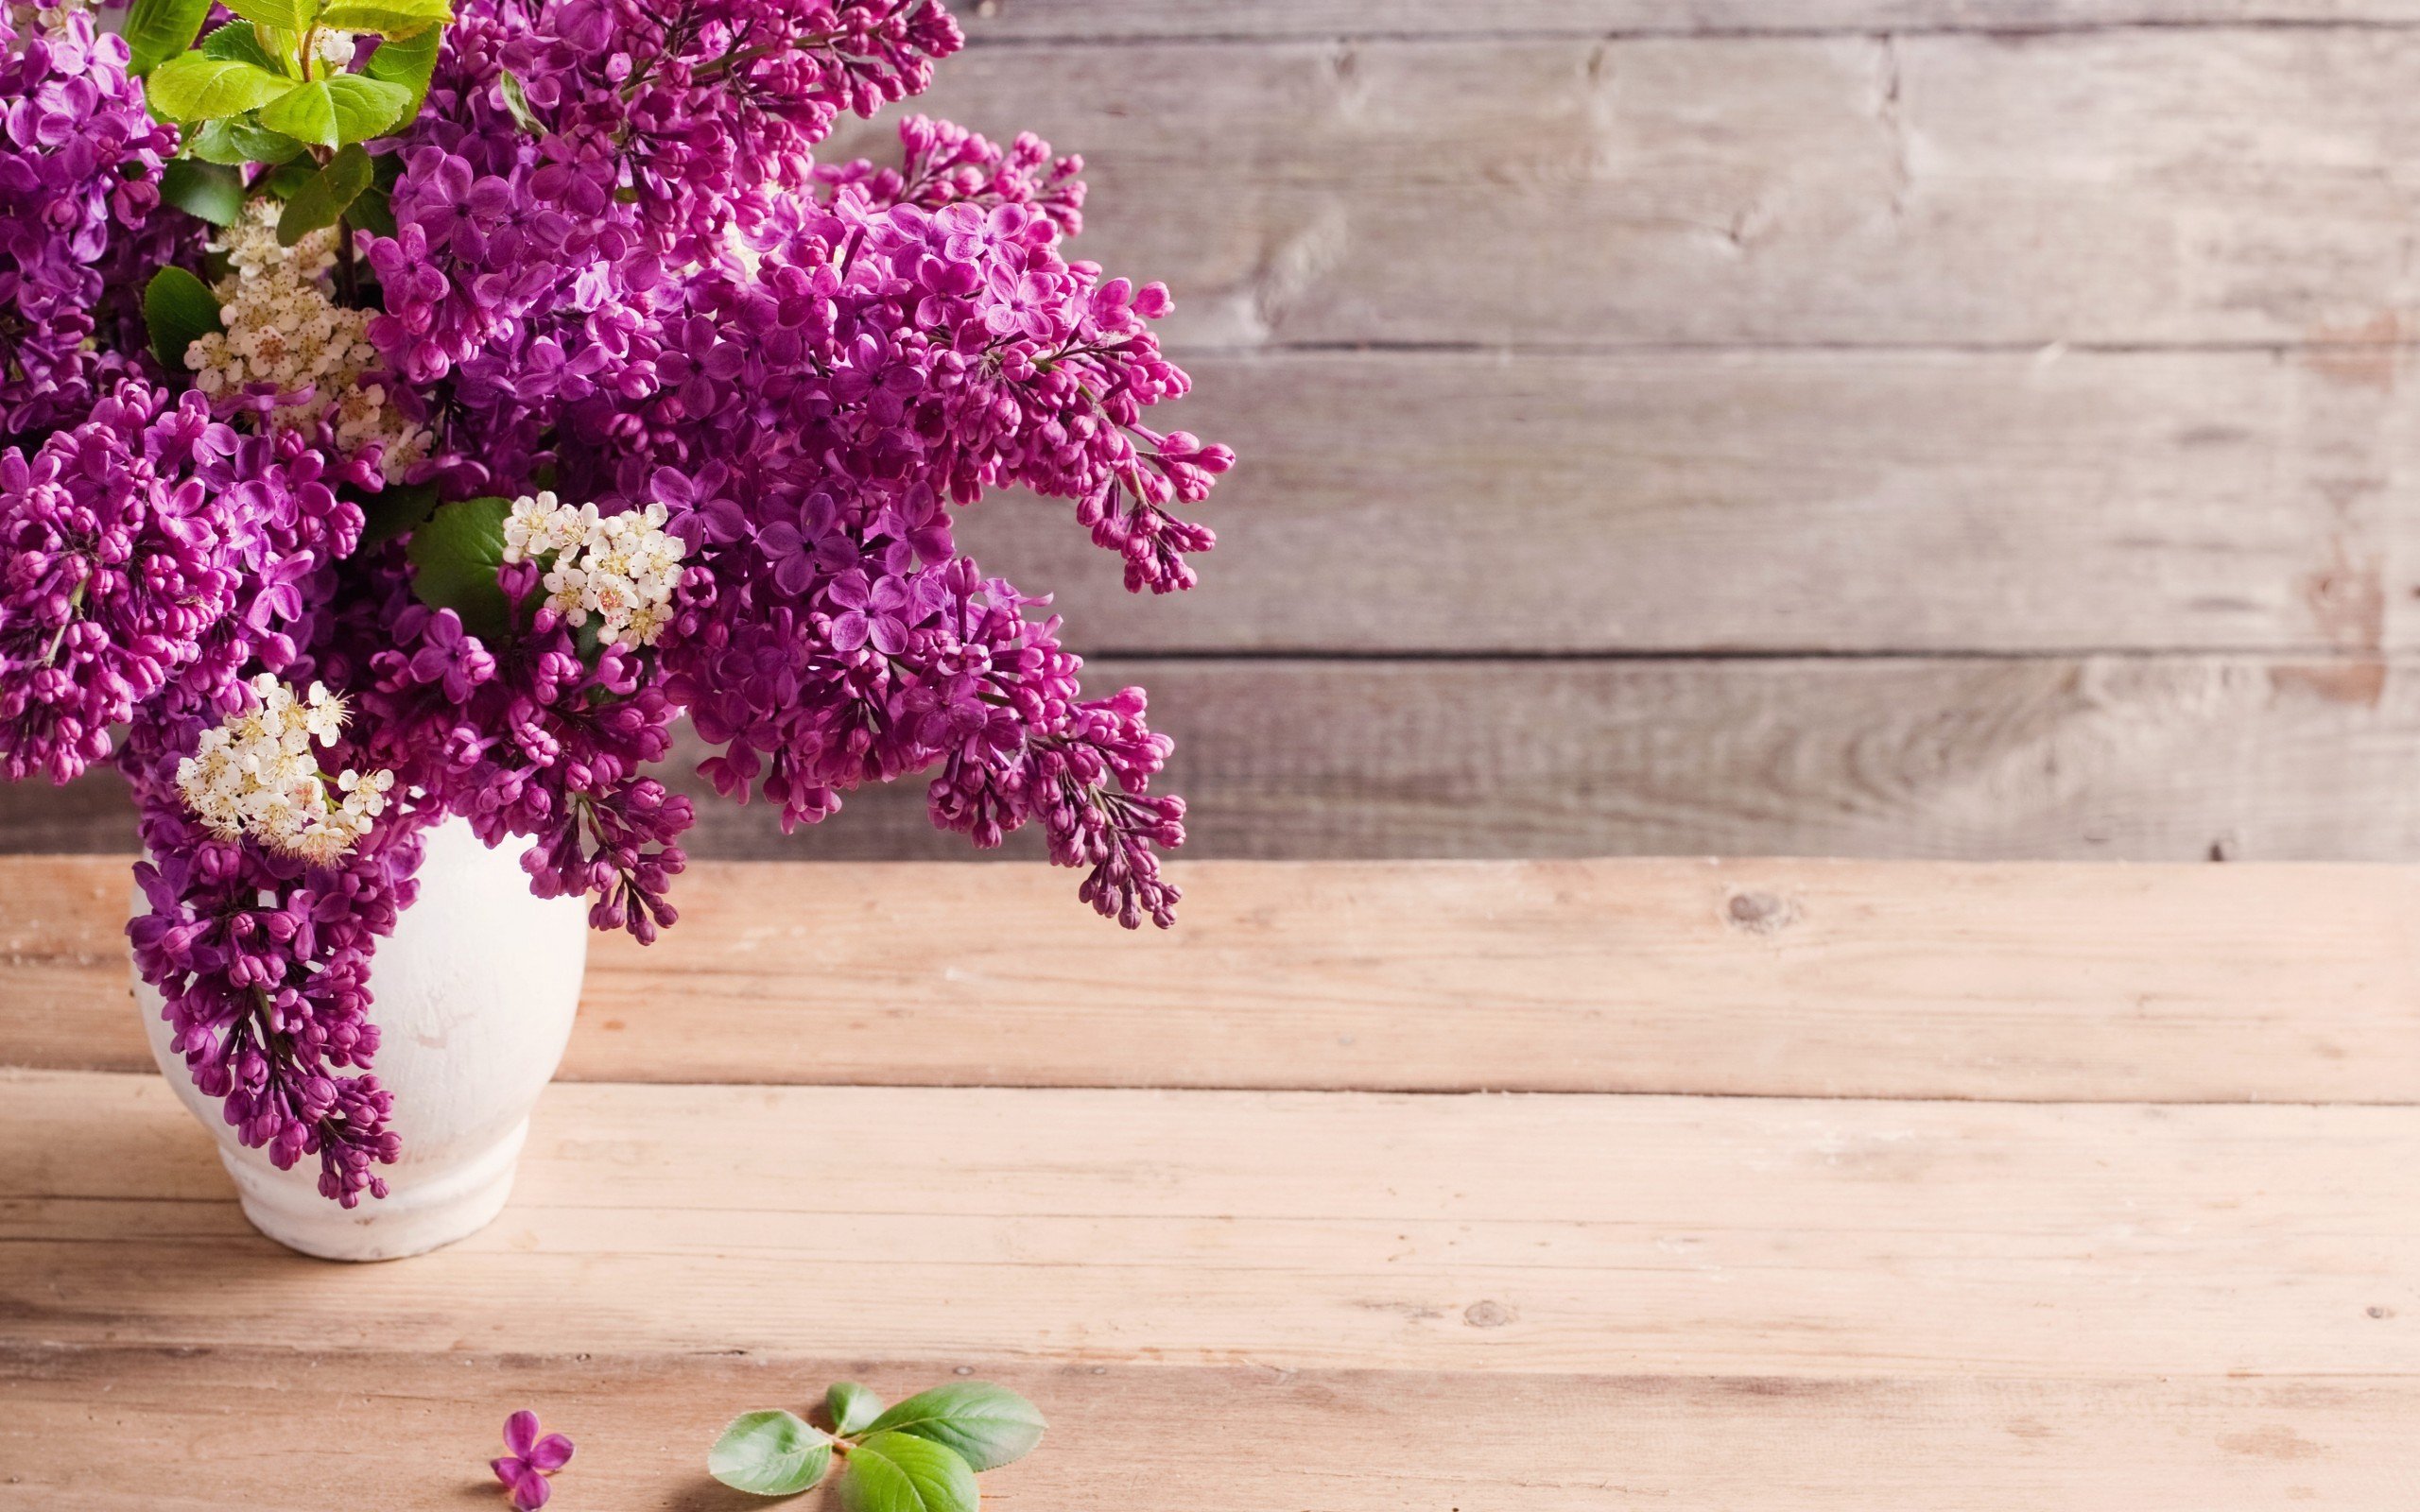 Flowers Lilac Vases Wooden Planks Wallpaper Background